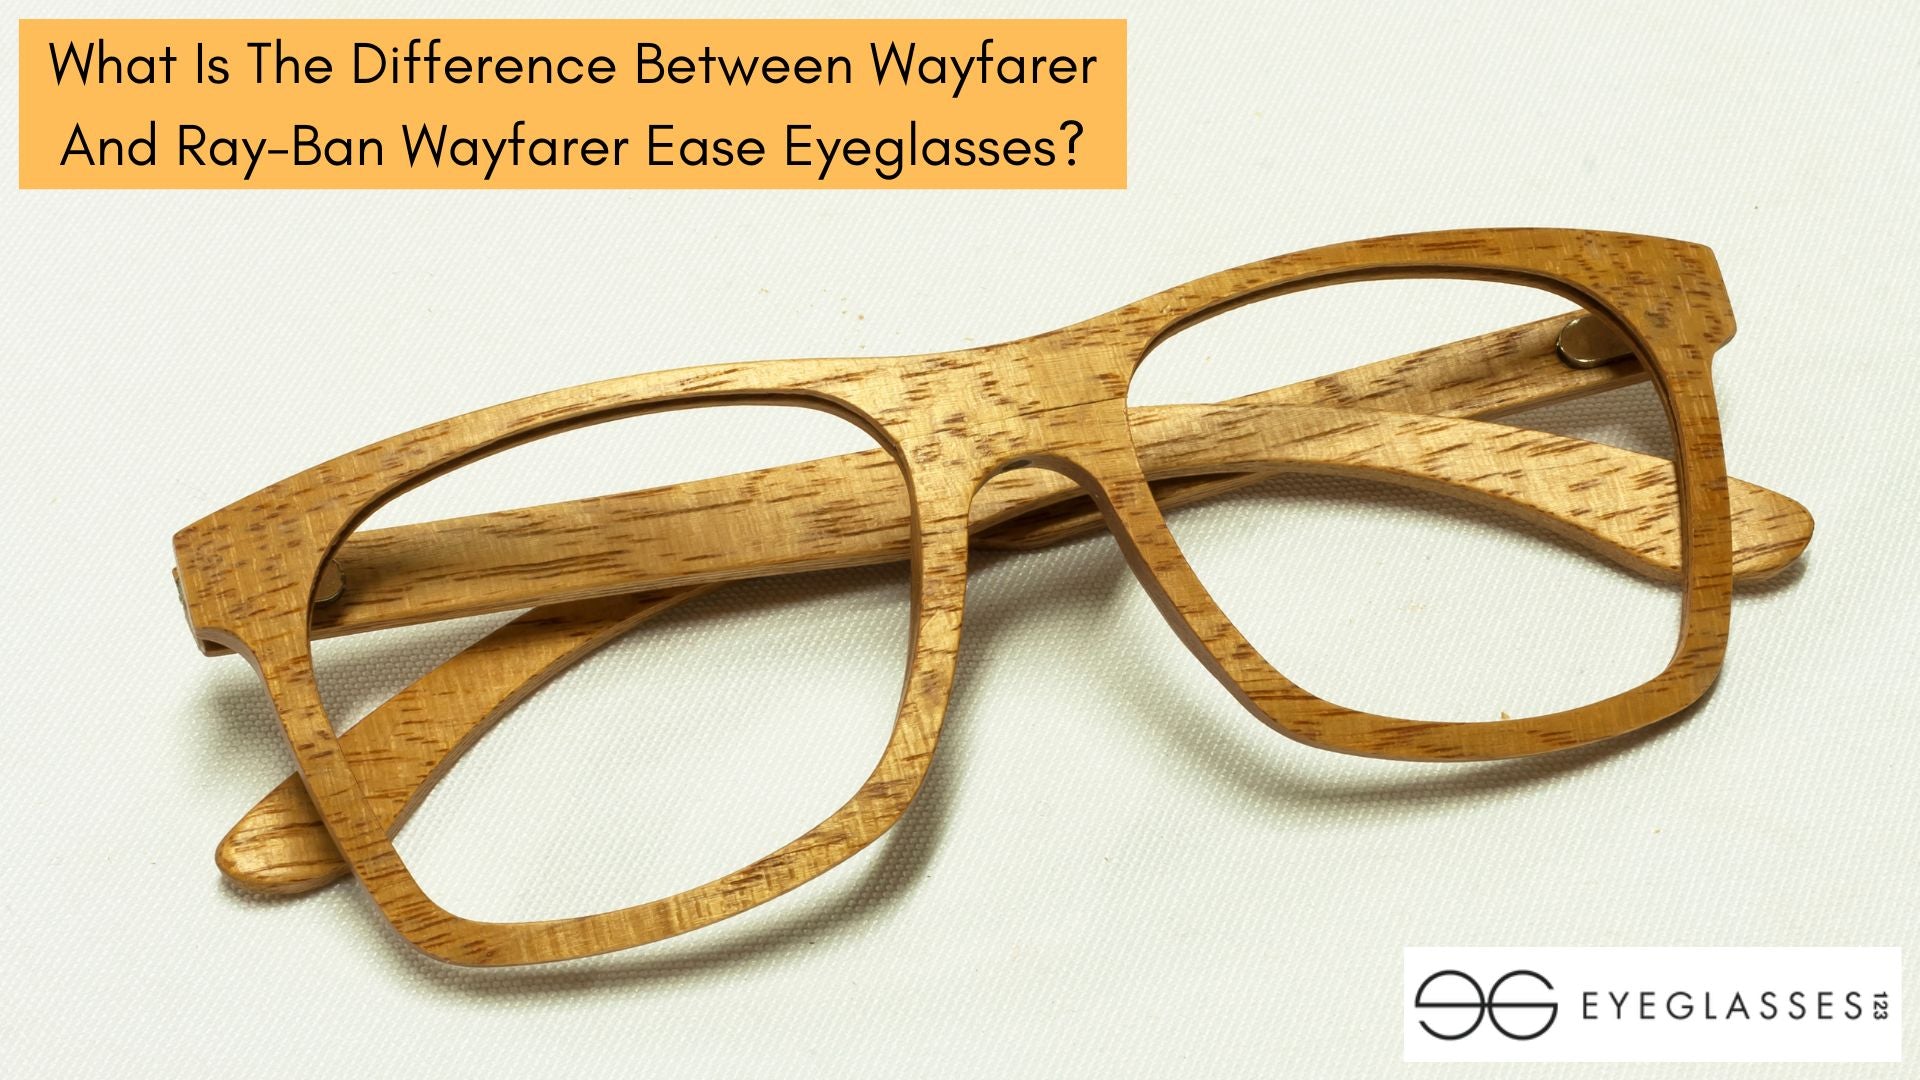 What Is The Difference Between Wayfarer And Ray-Ban Wayfarer Ease Eyeglasses?